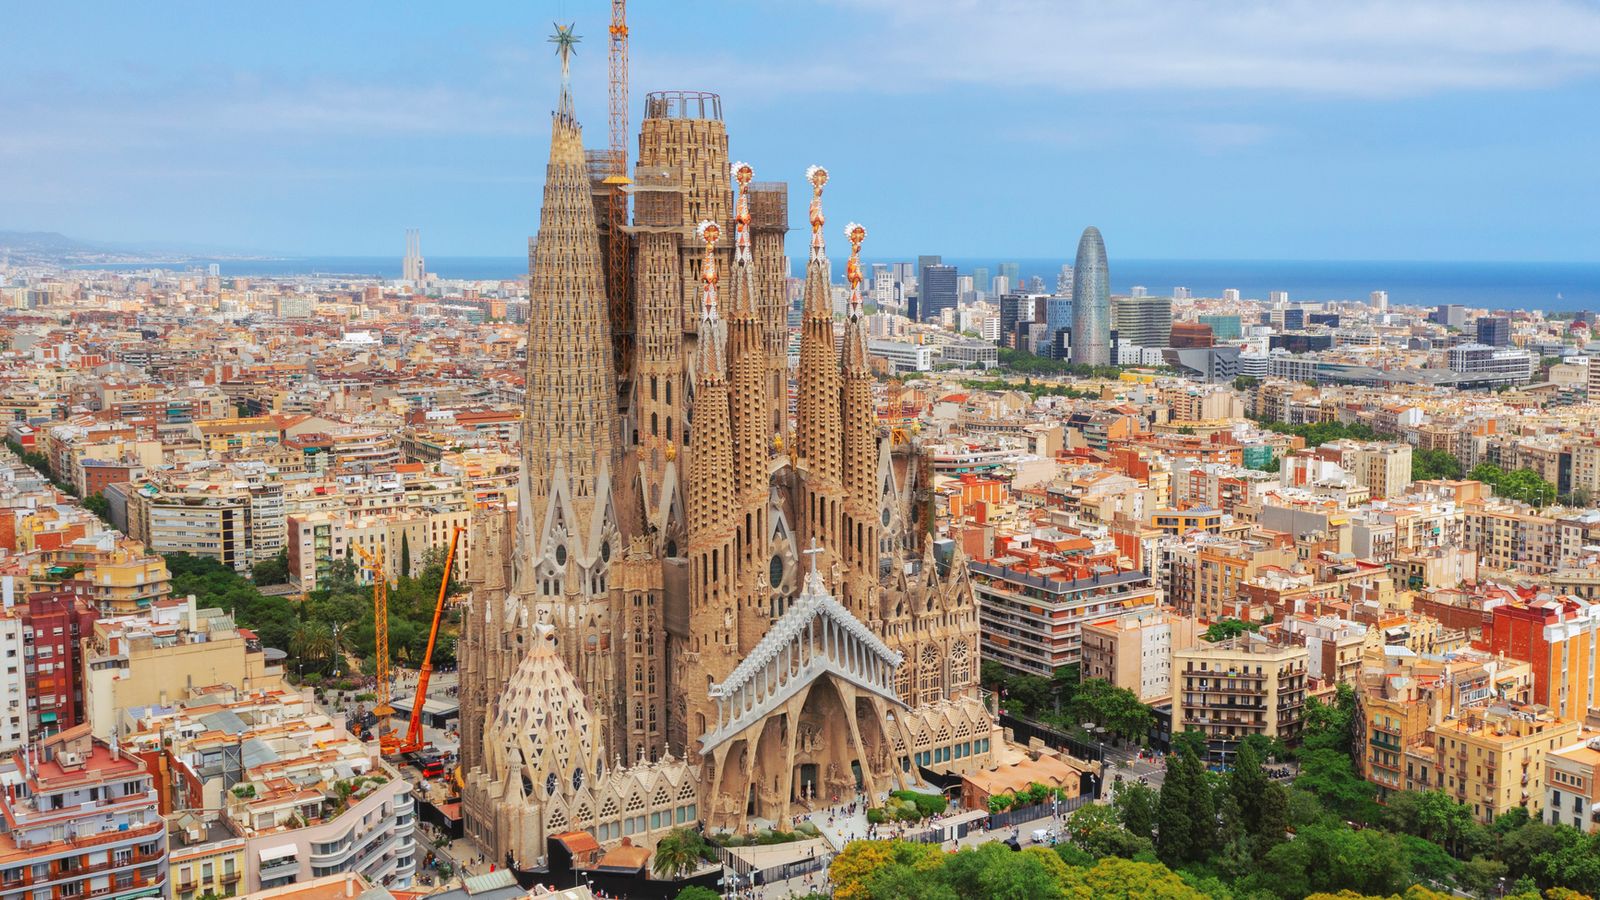 Barcelona's famously unfinished Sagrada Familia church to be completed by 2026 